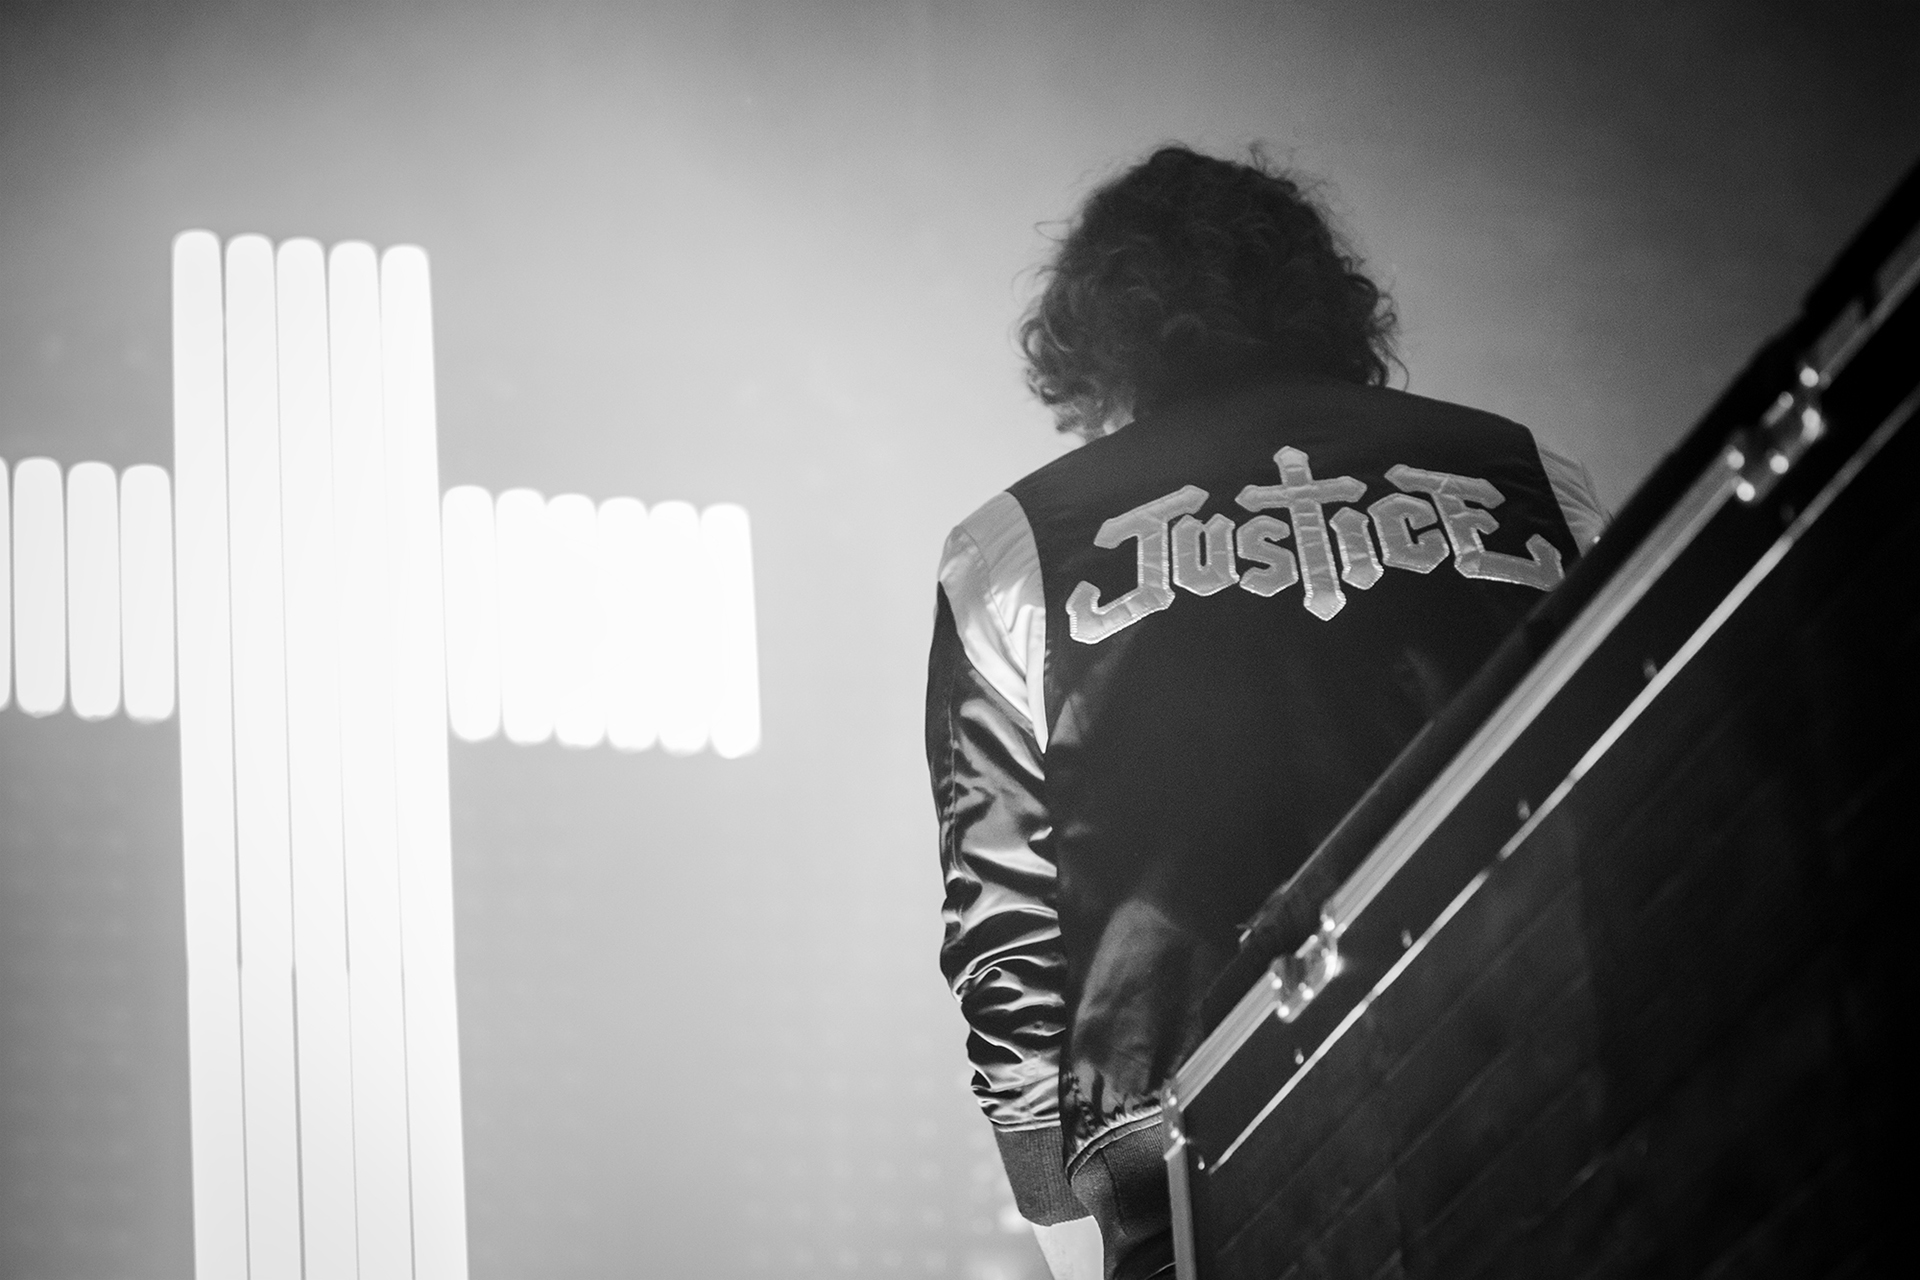 Justice live at Columbiahalle Berlin captured by Yvonne Hartmann